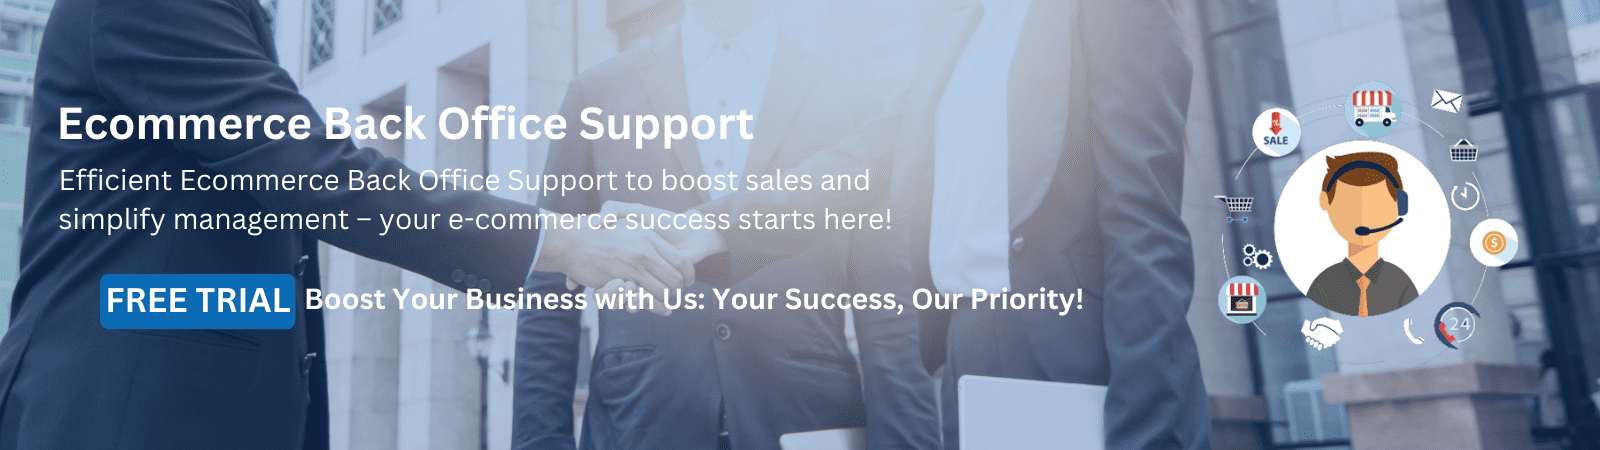 ecommerce back office support